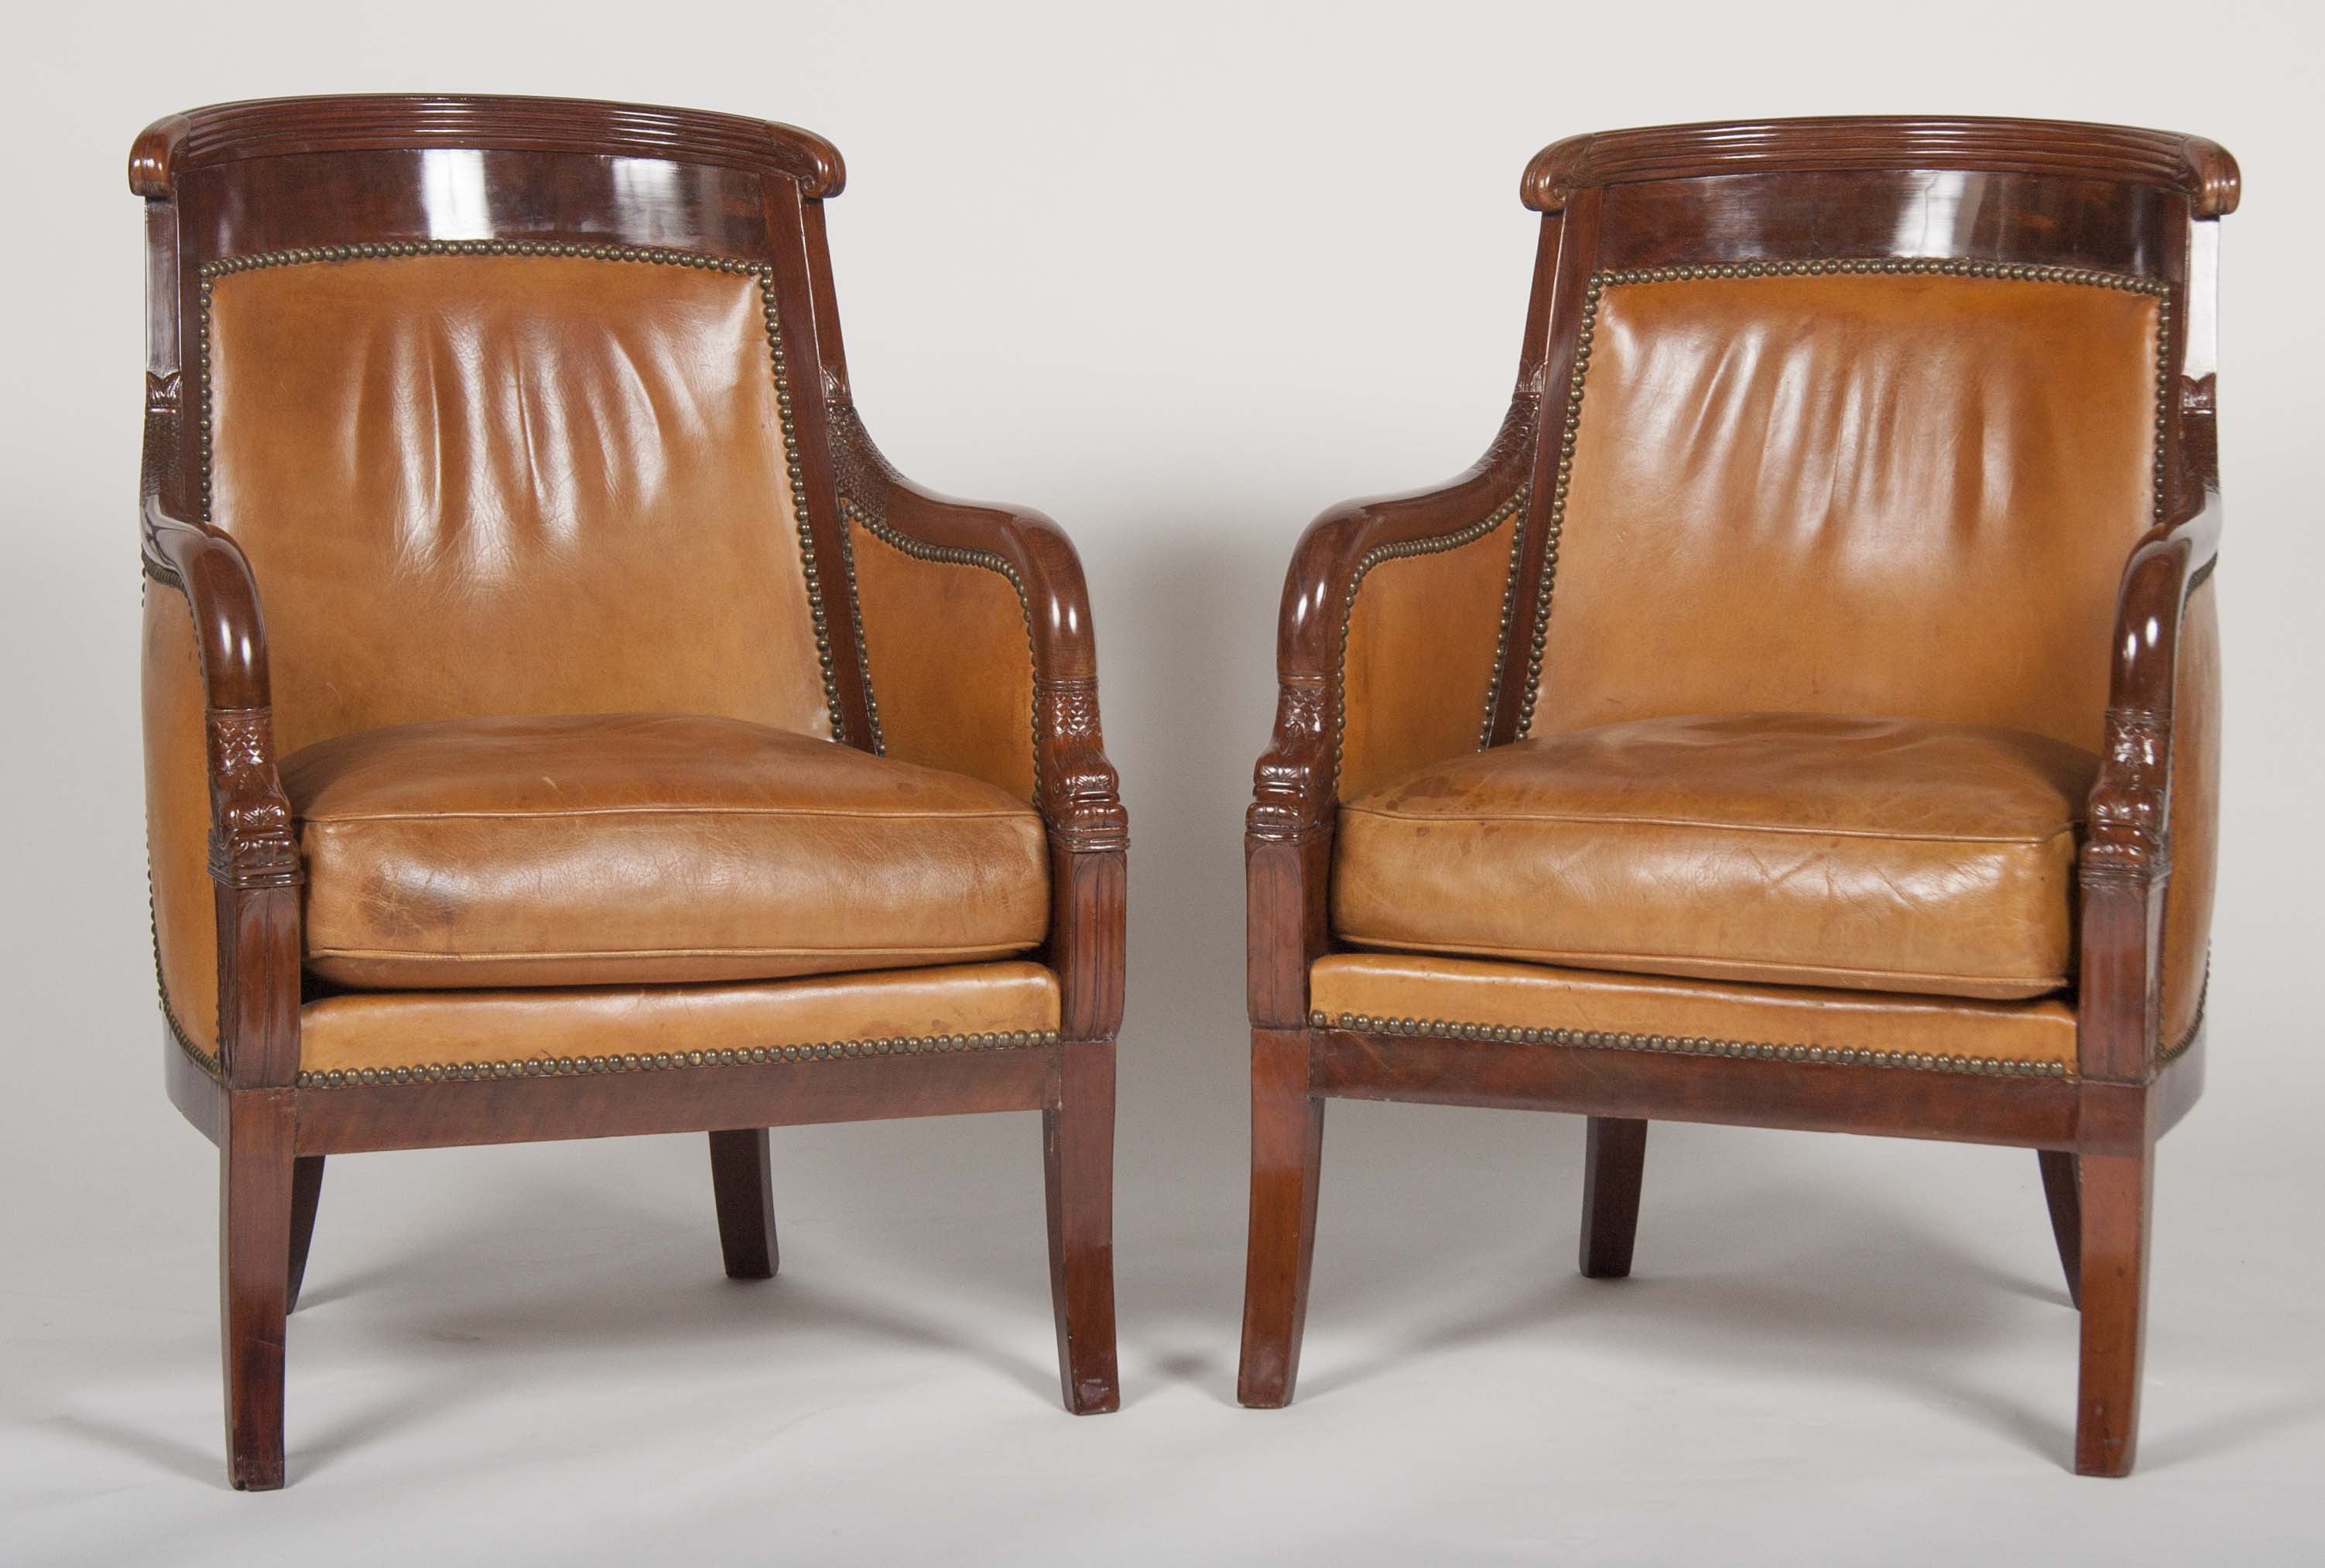 Matched Pair of Mahogany Louis Philippe Bergères